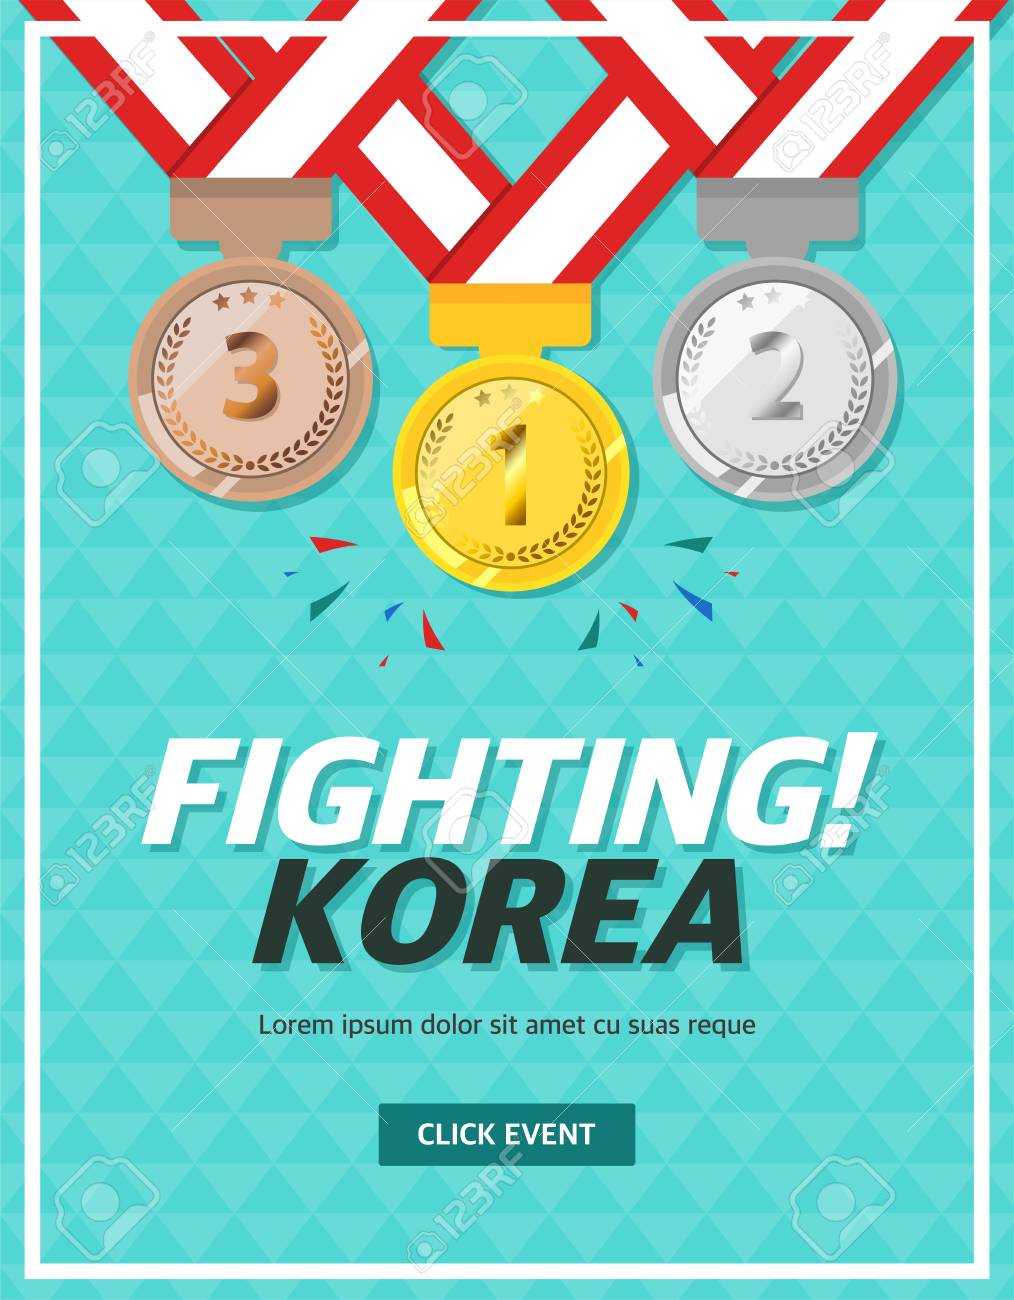 Event Banner Template With Medals – Fighting Korea Pertaining To Event Banner Template